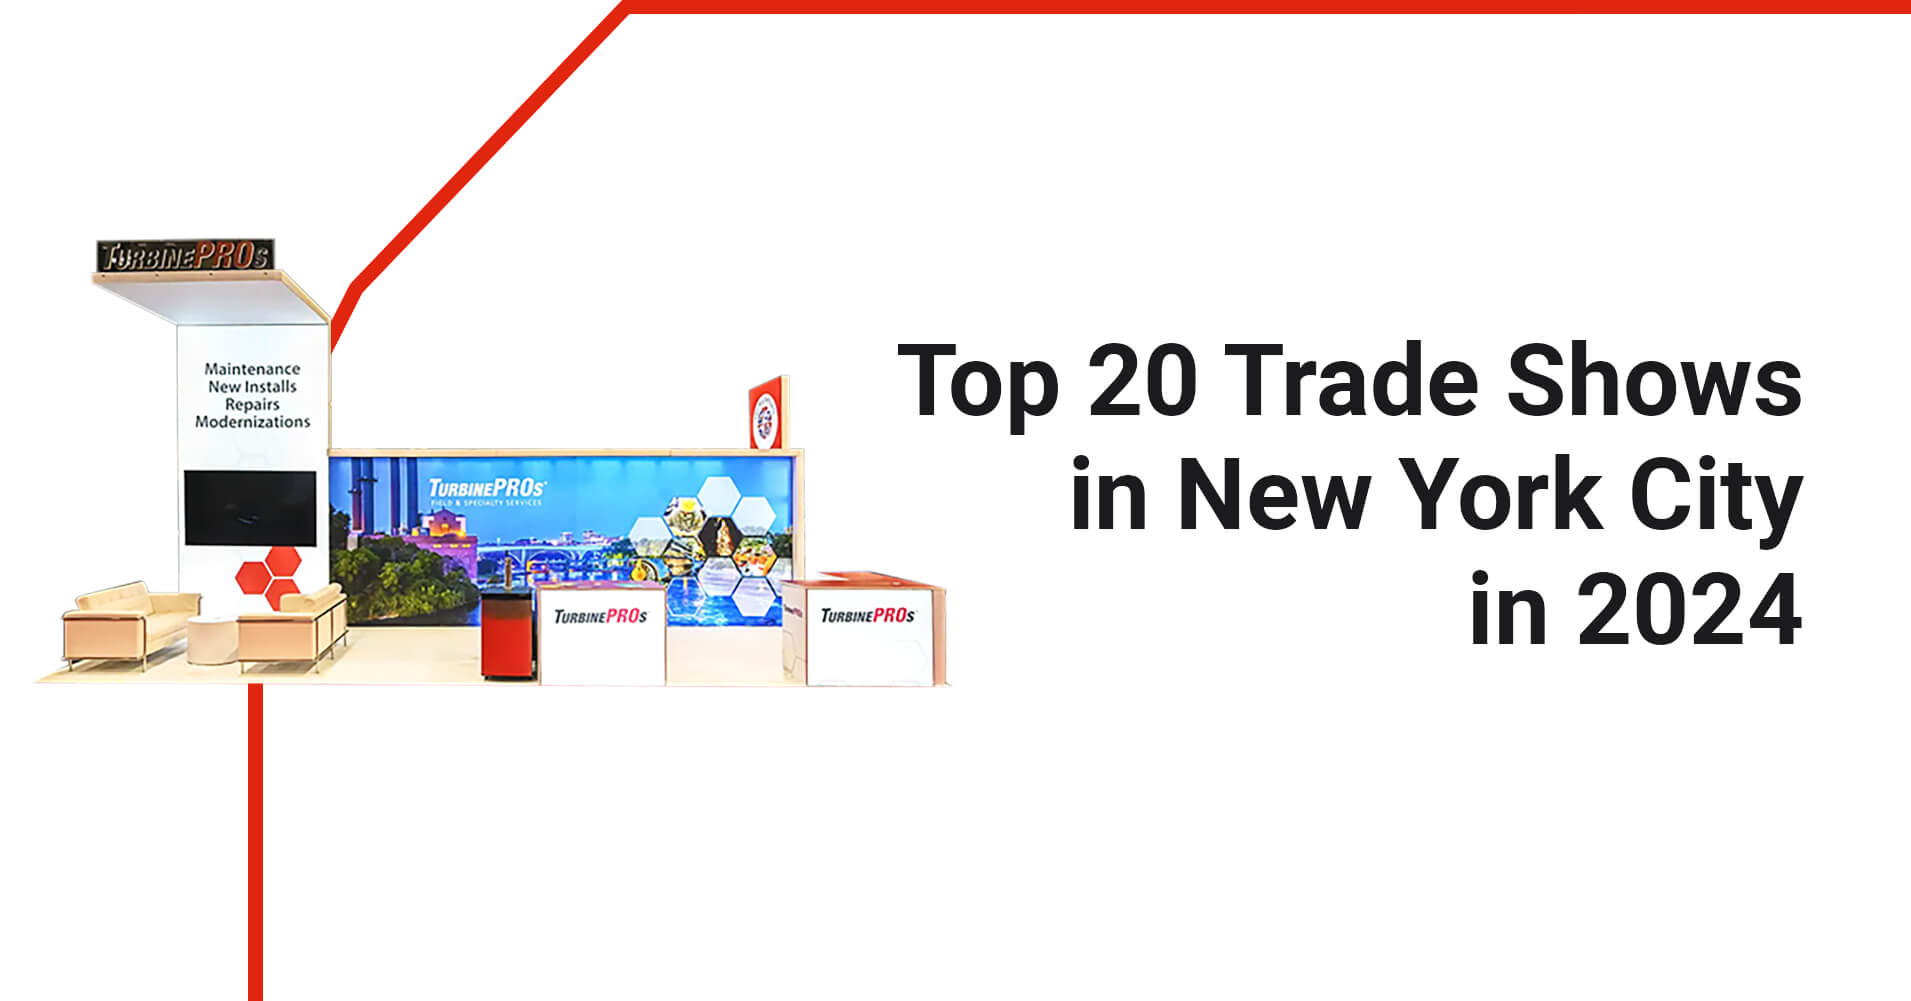 Top Trade Shows in New York City in 2024